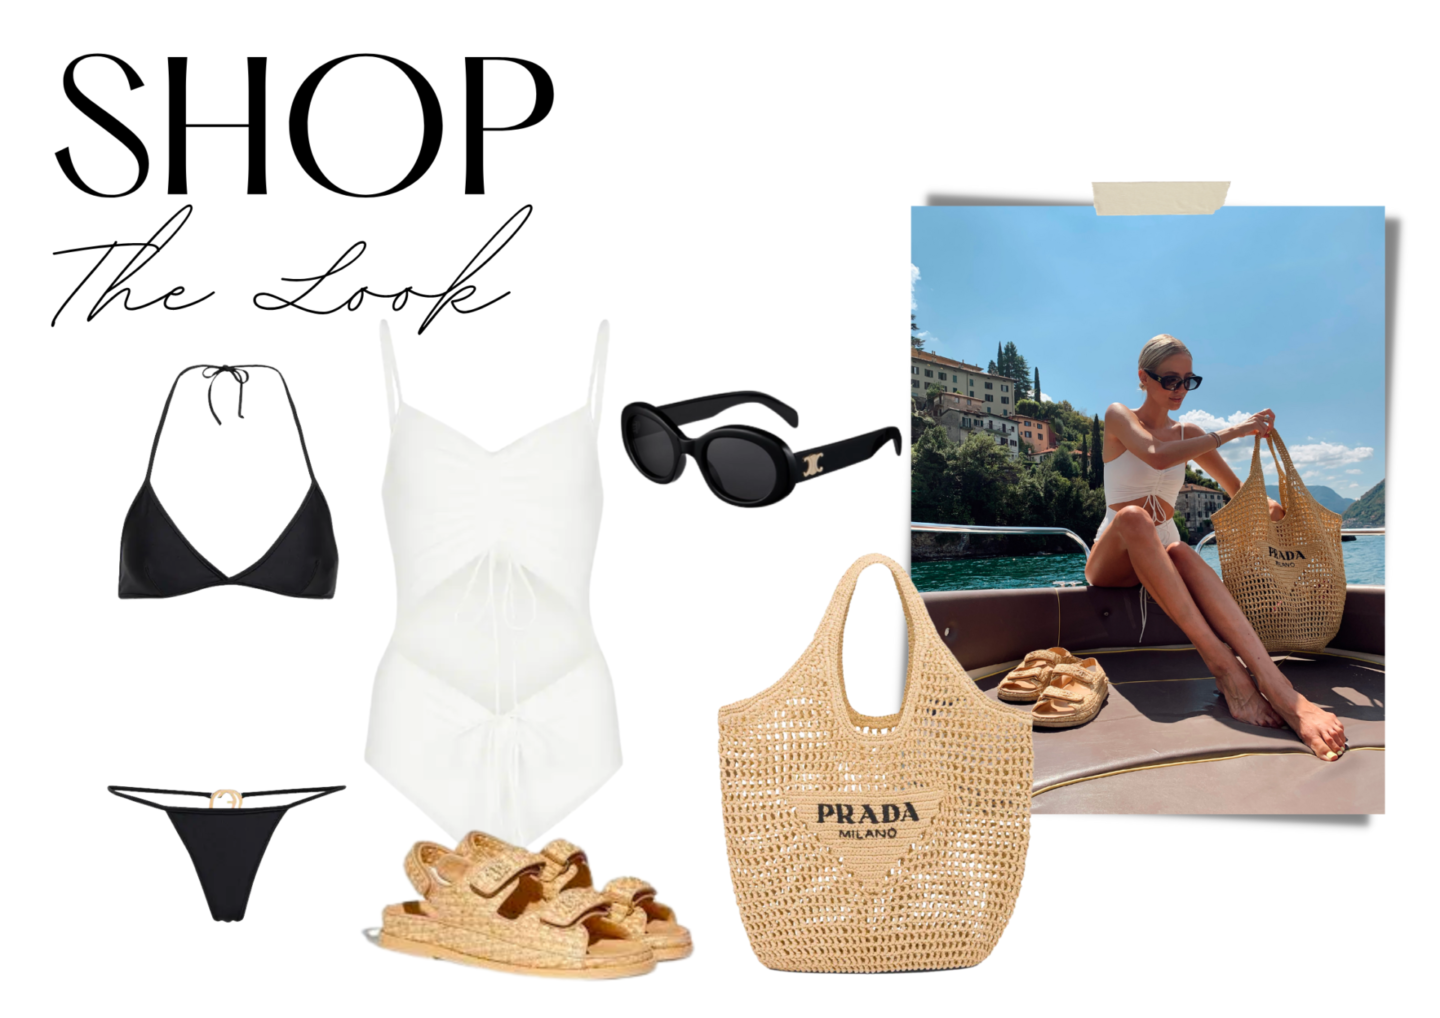 SHOP THE LOOK | BOAT DAY SWIM